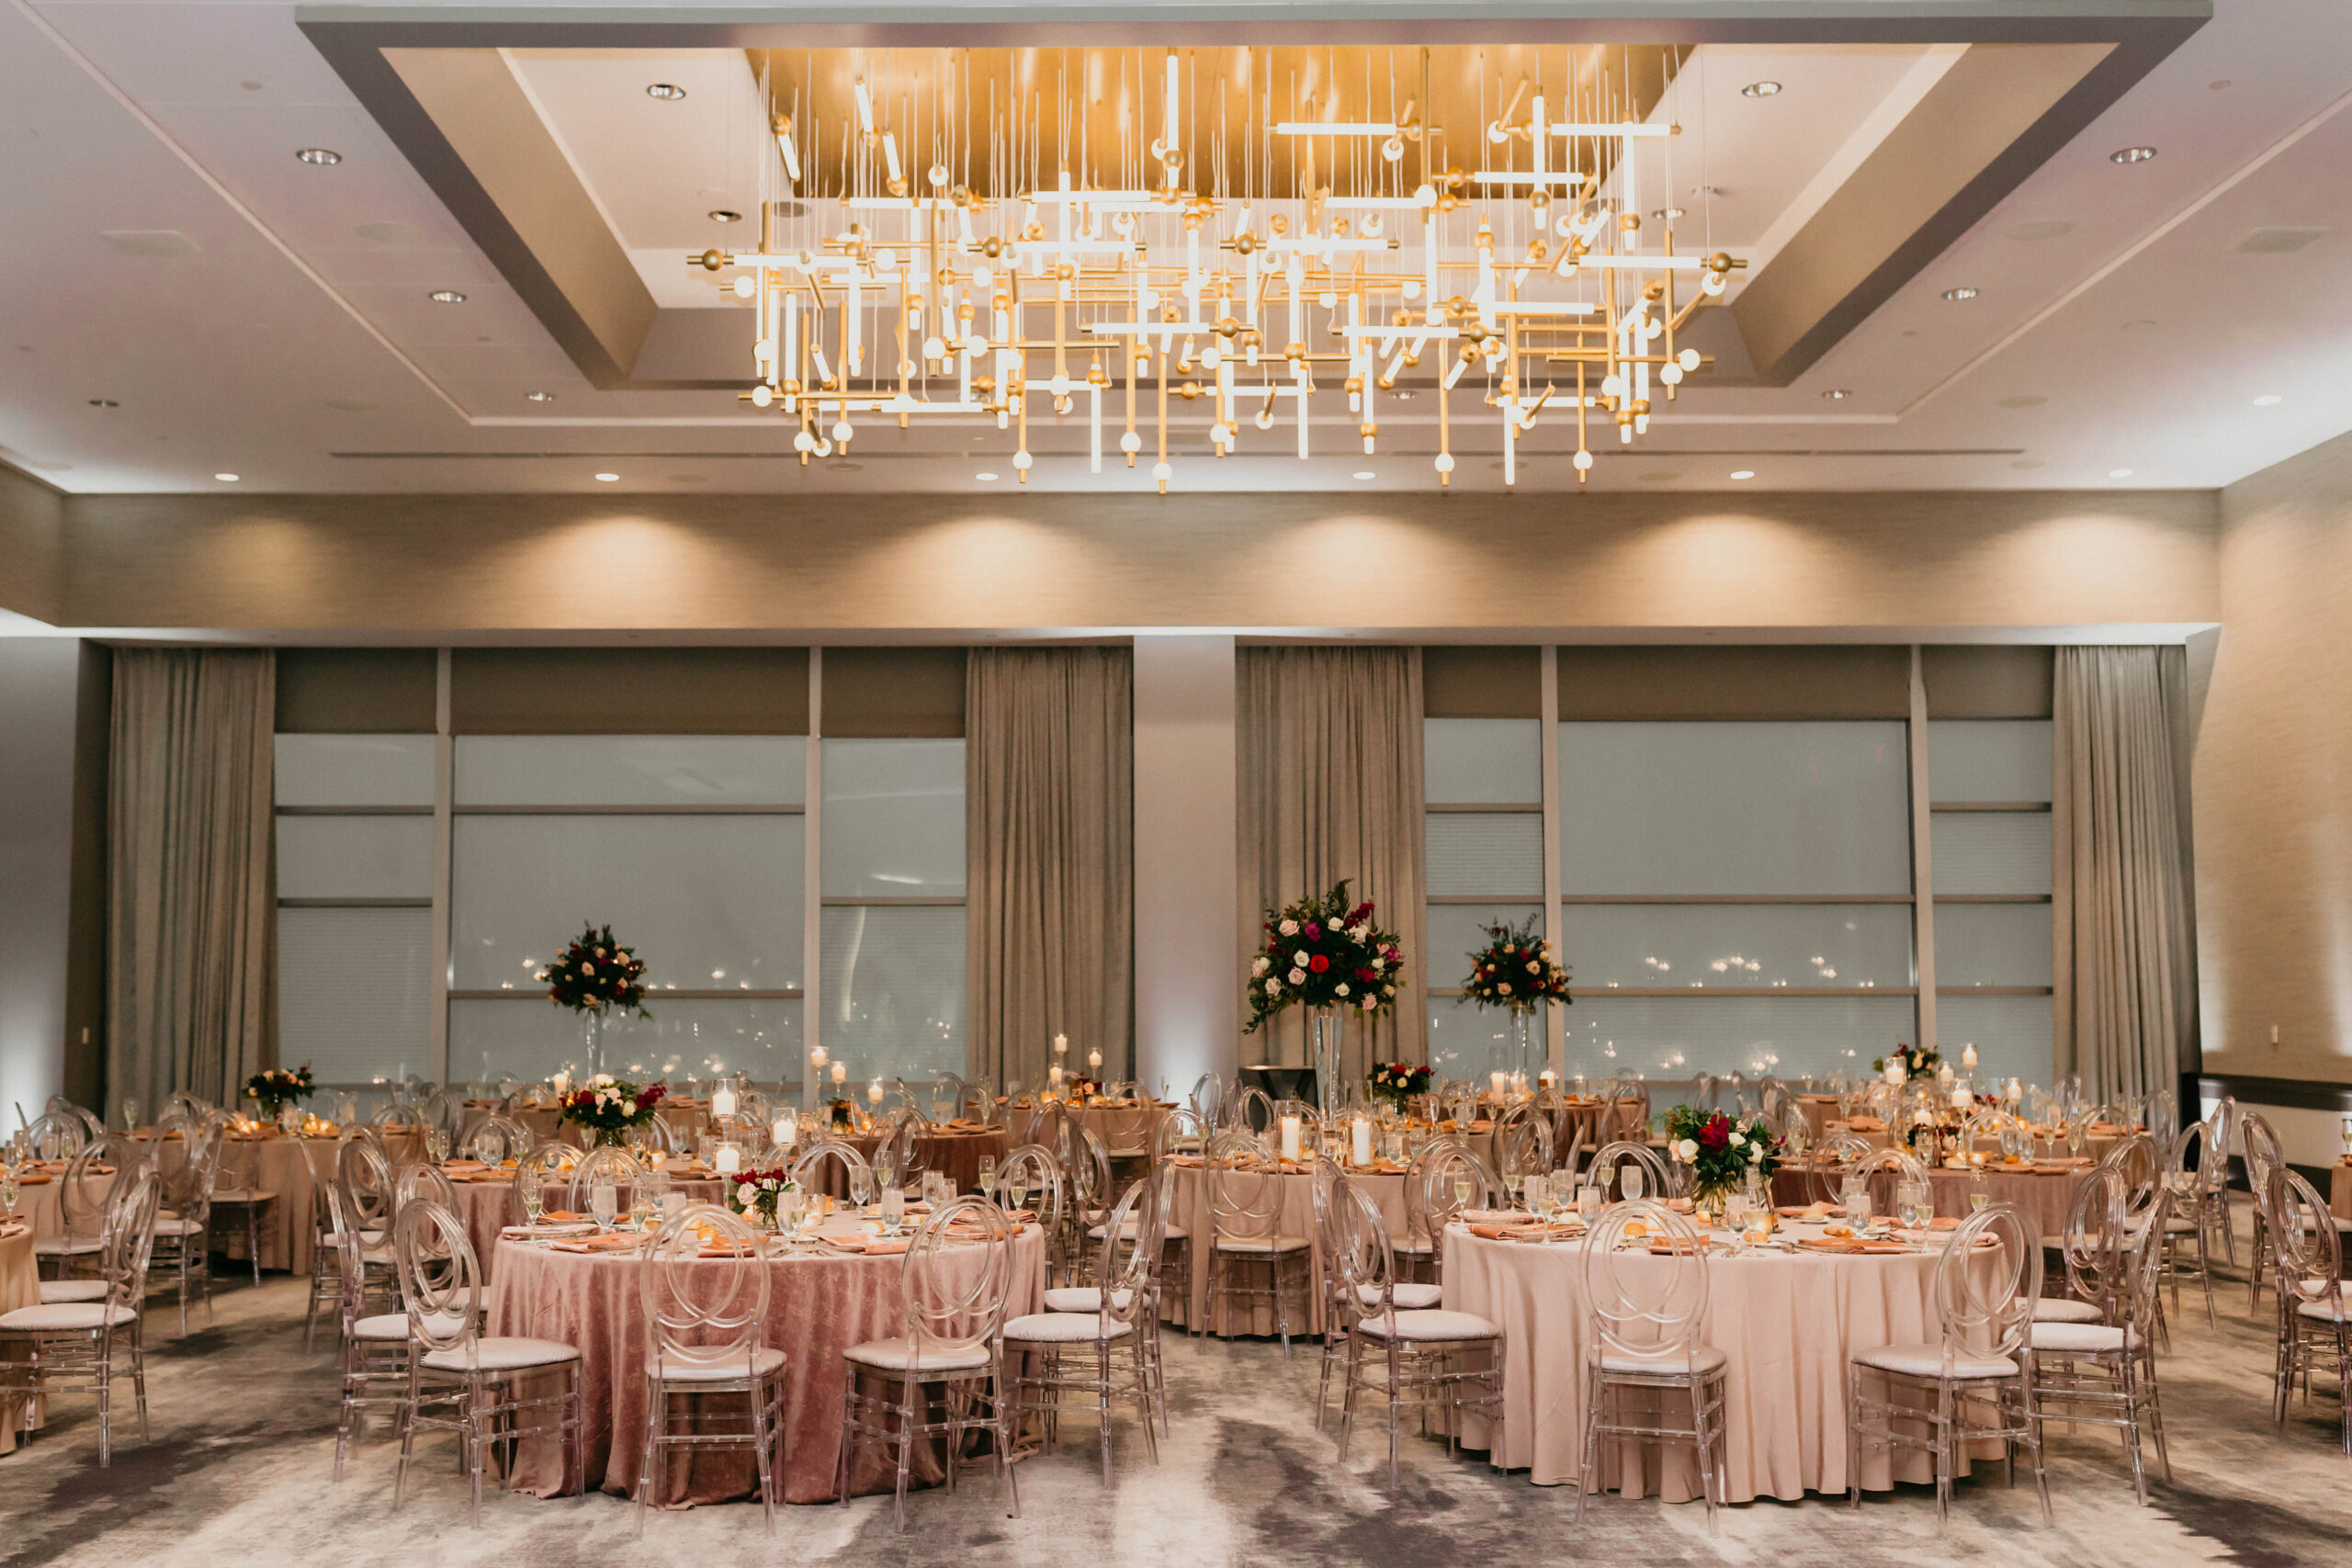 A photo of tables and chairs set up for a wedding reception. A unique chandelier lights the room from above.